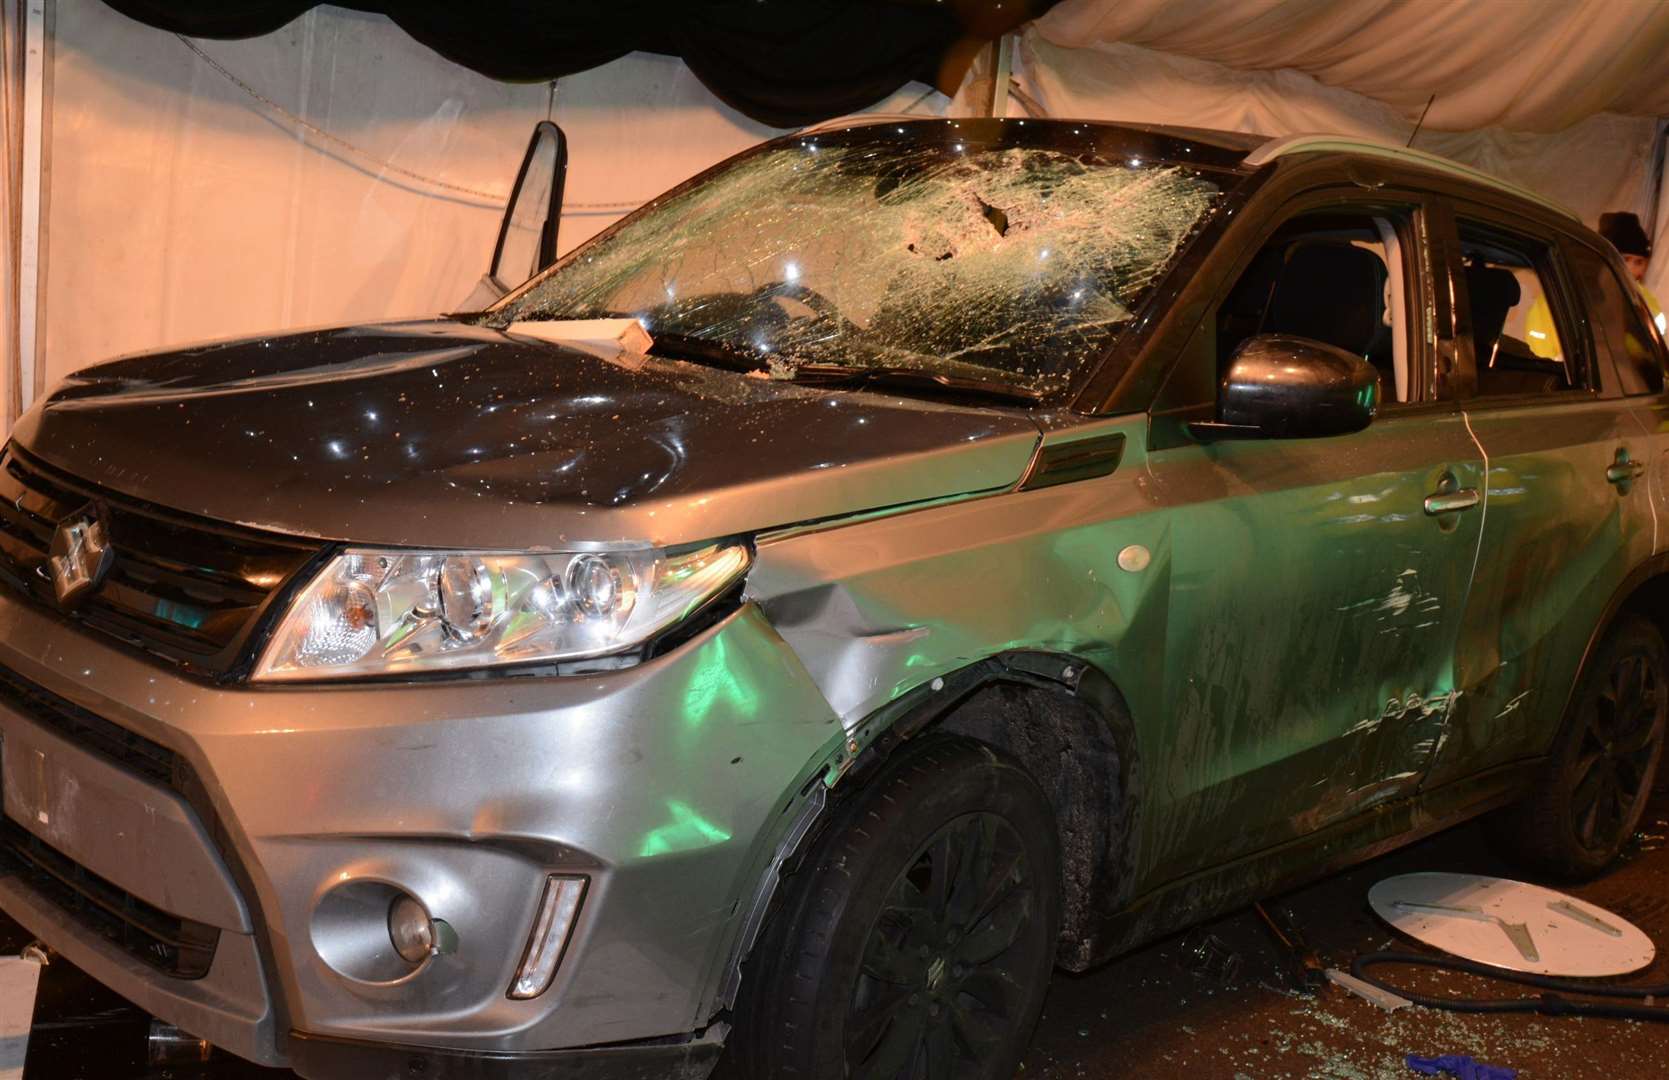 The car after ploughing into Blake's nightclub